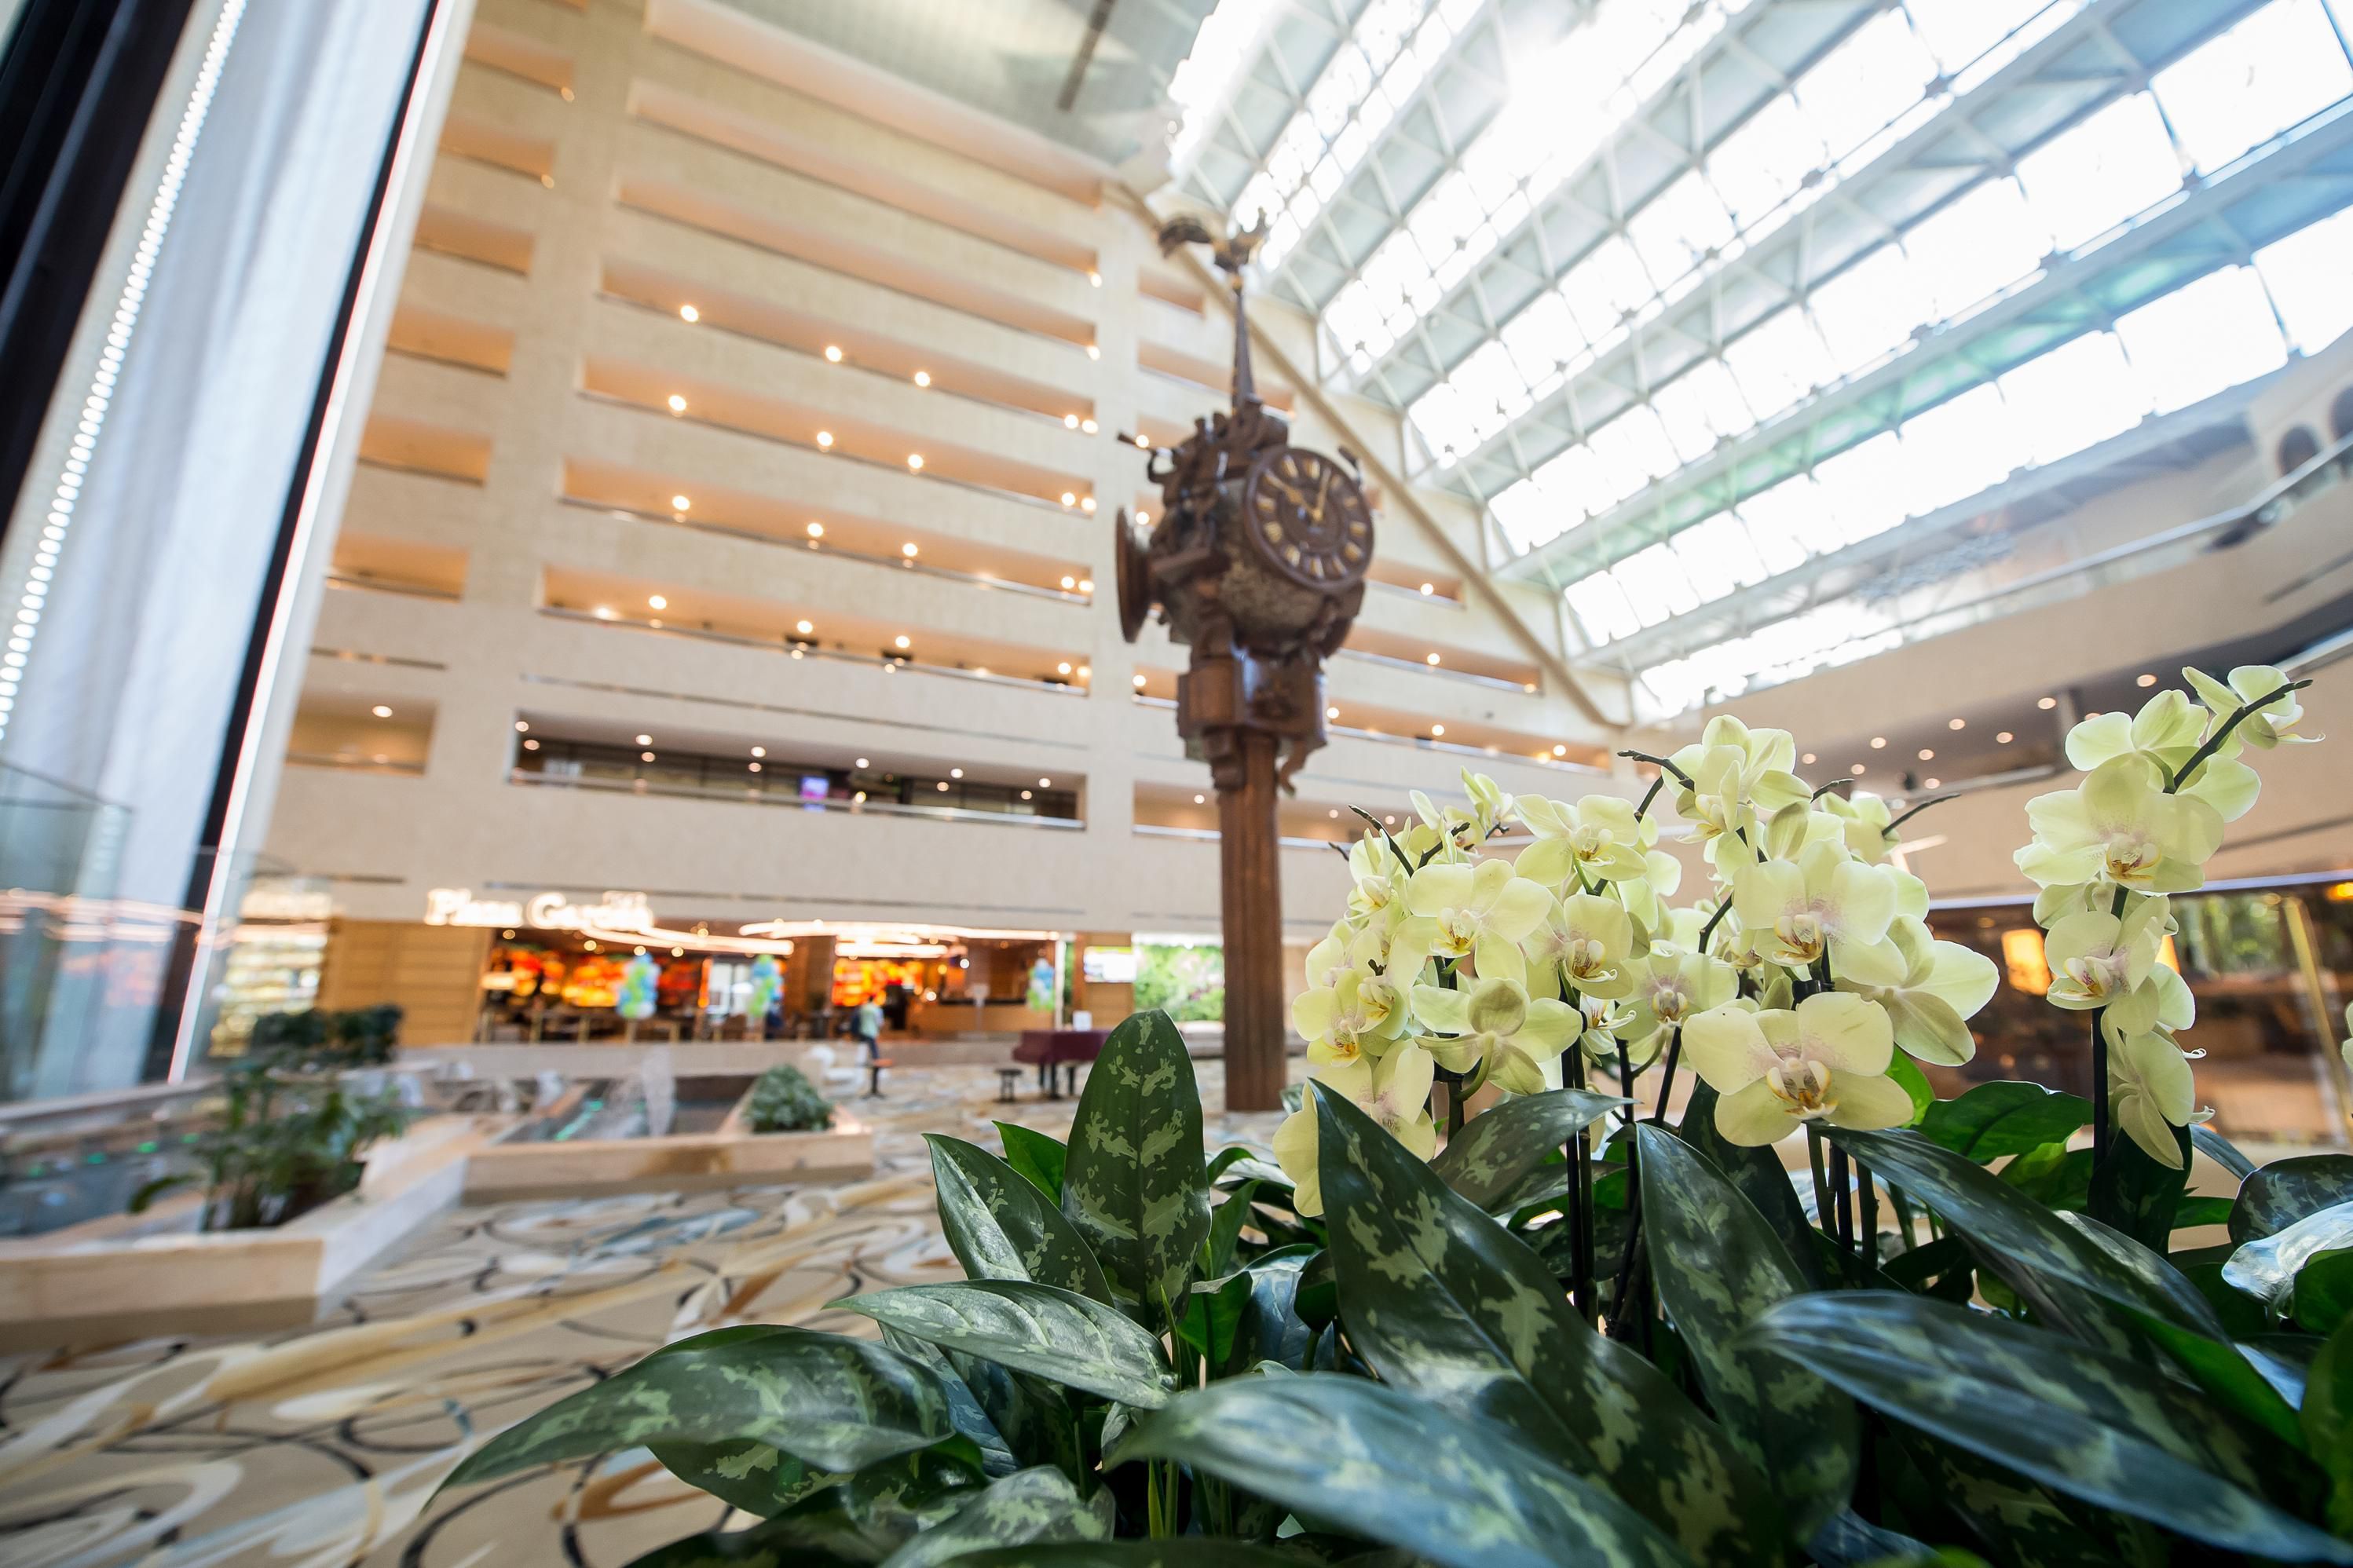 Signature clock in Hotel Atrium, lobby decorated with live flowers